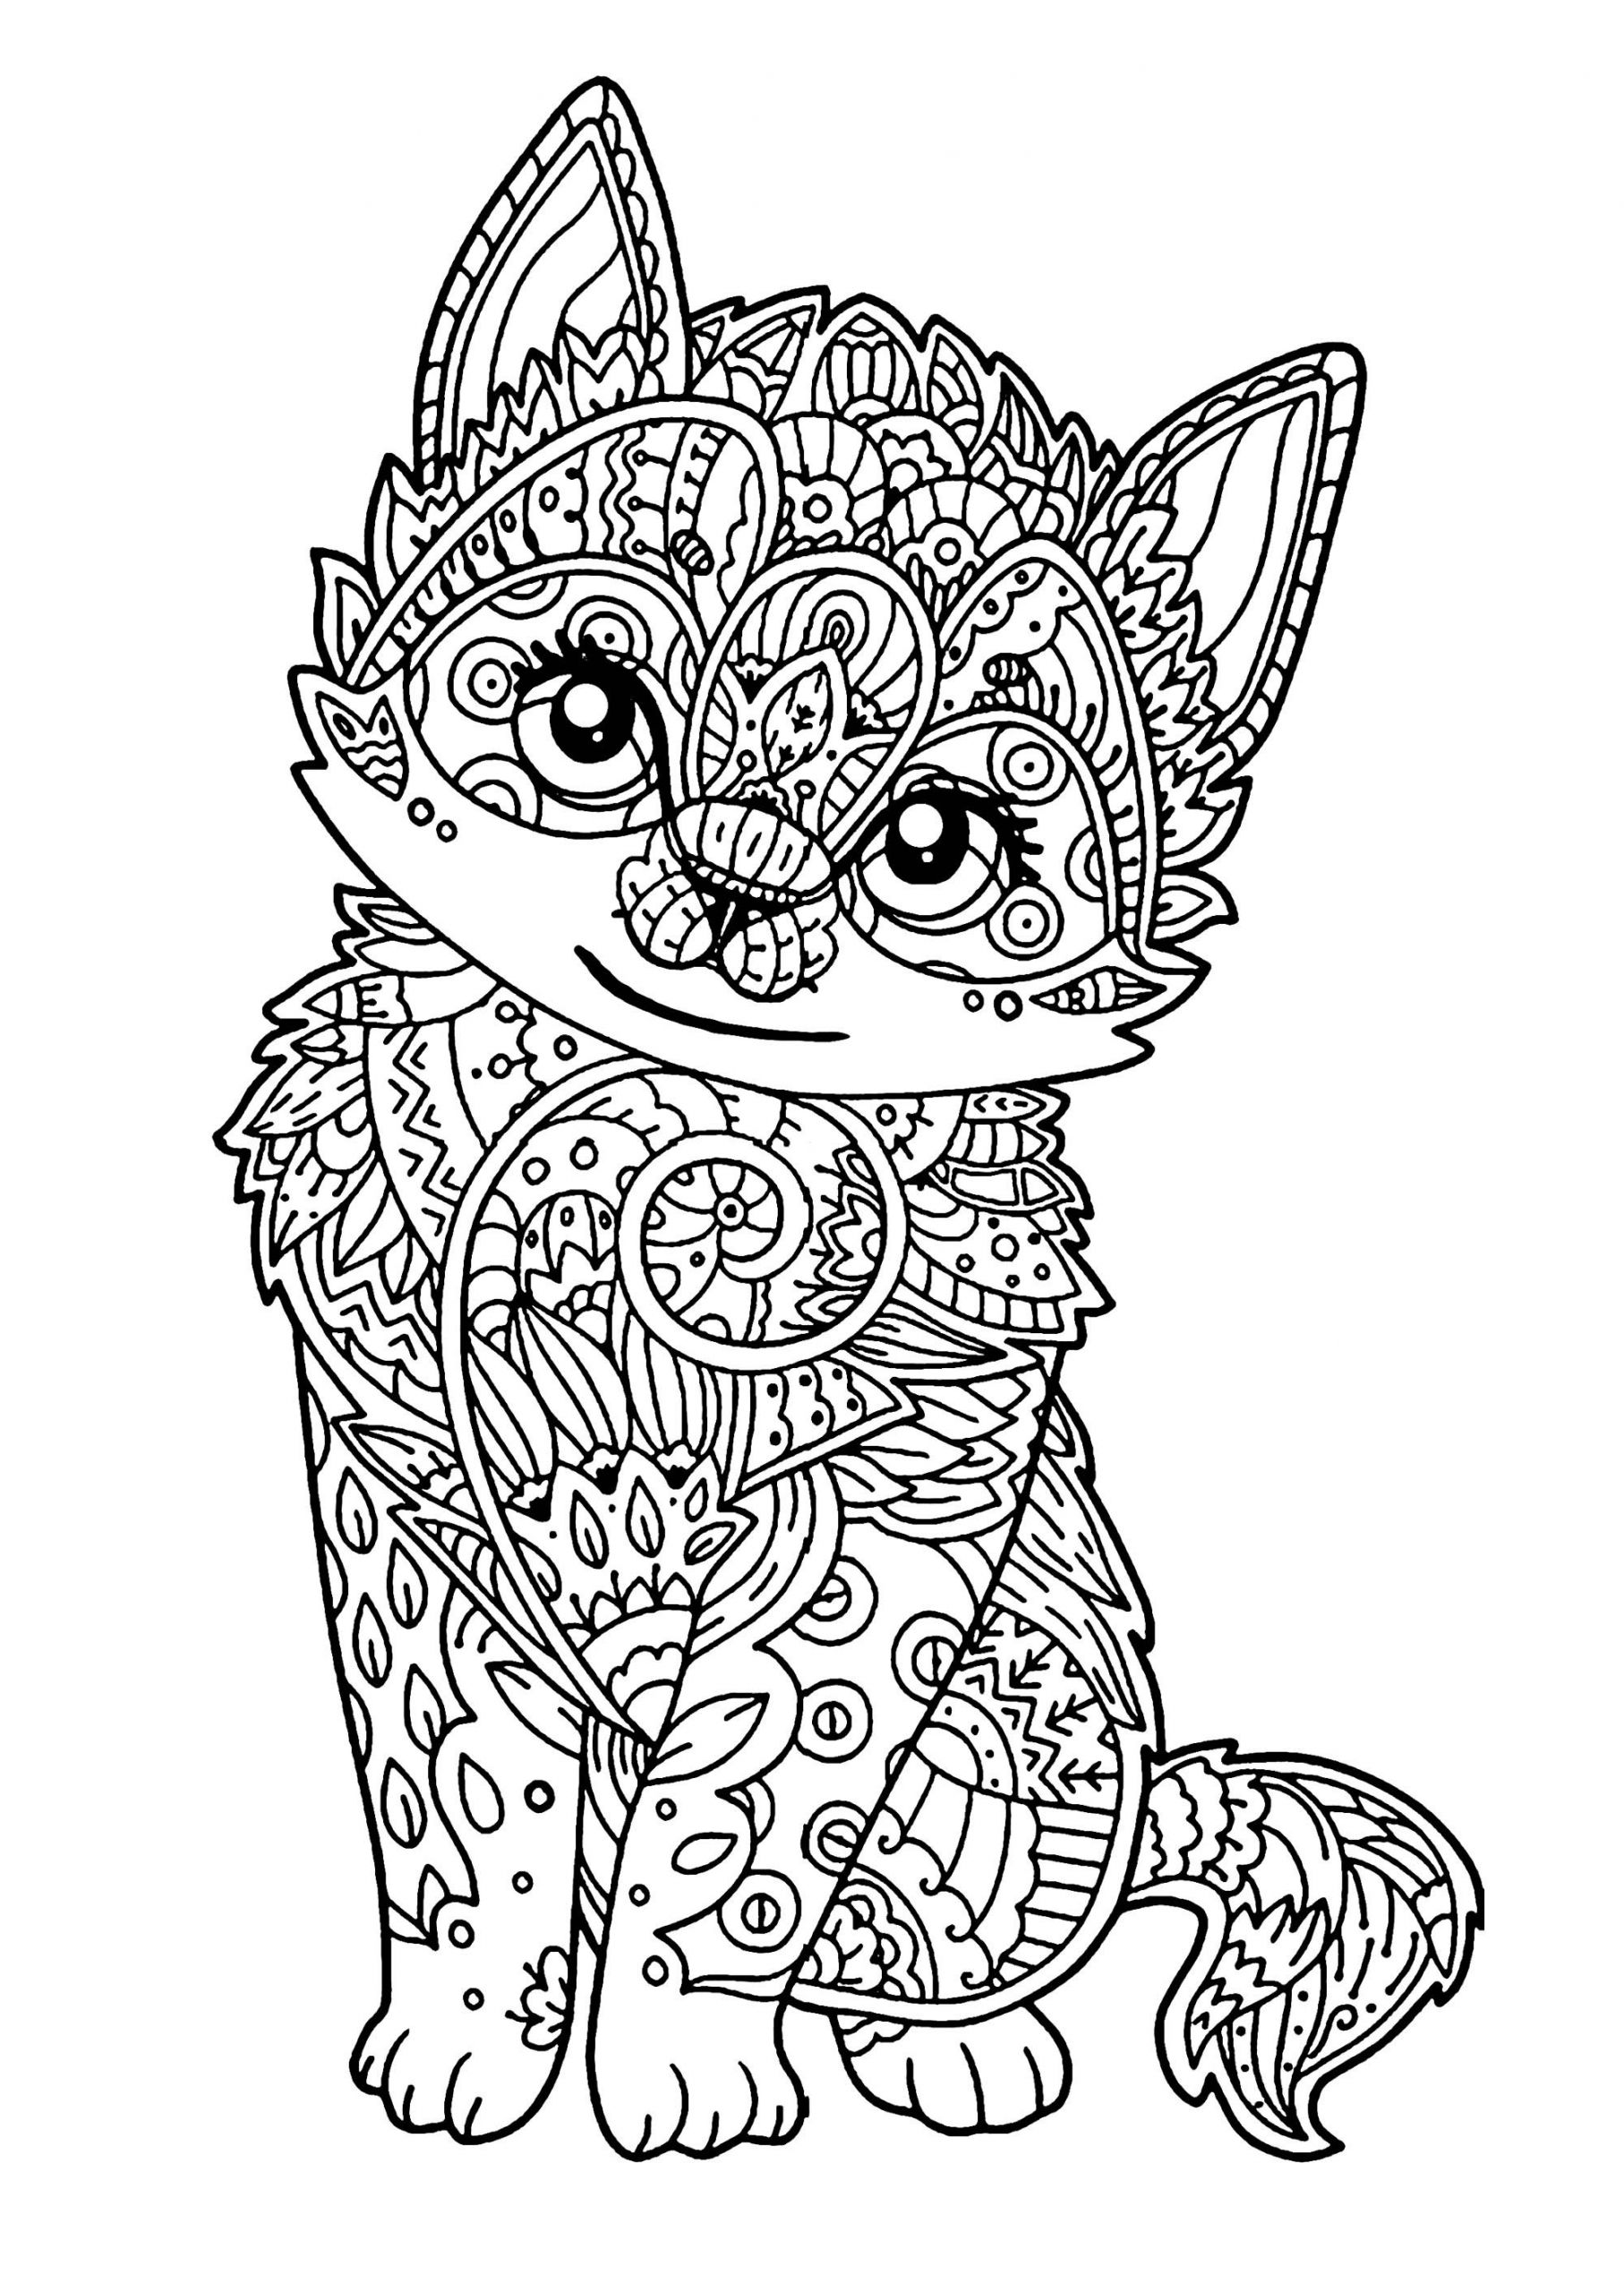 Cat Coloring Pages For Kids
 Cat for kids Little kitten Cats Kids Coloring Pages